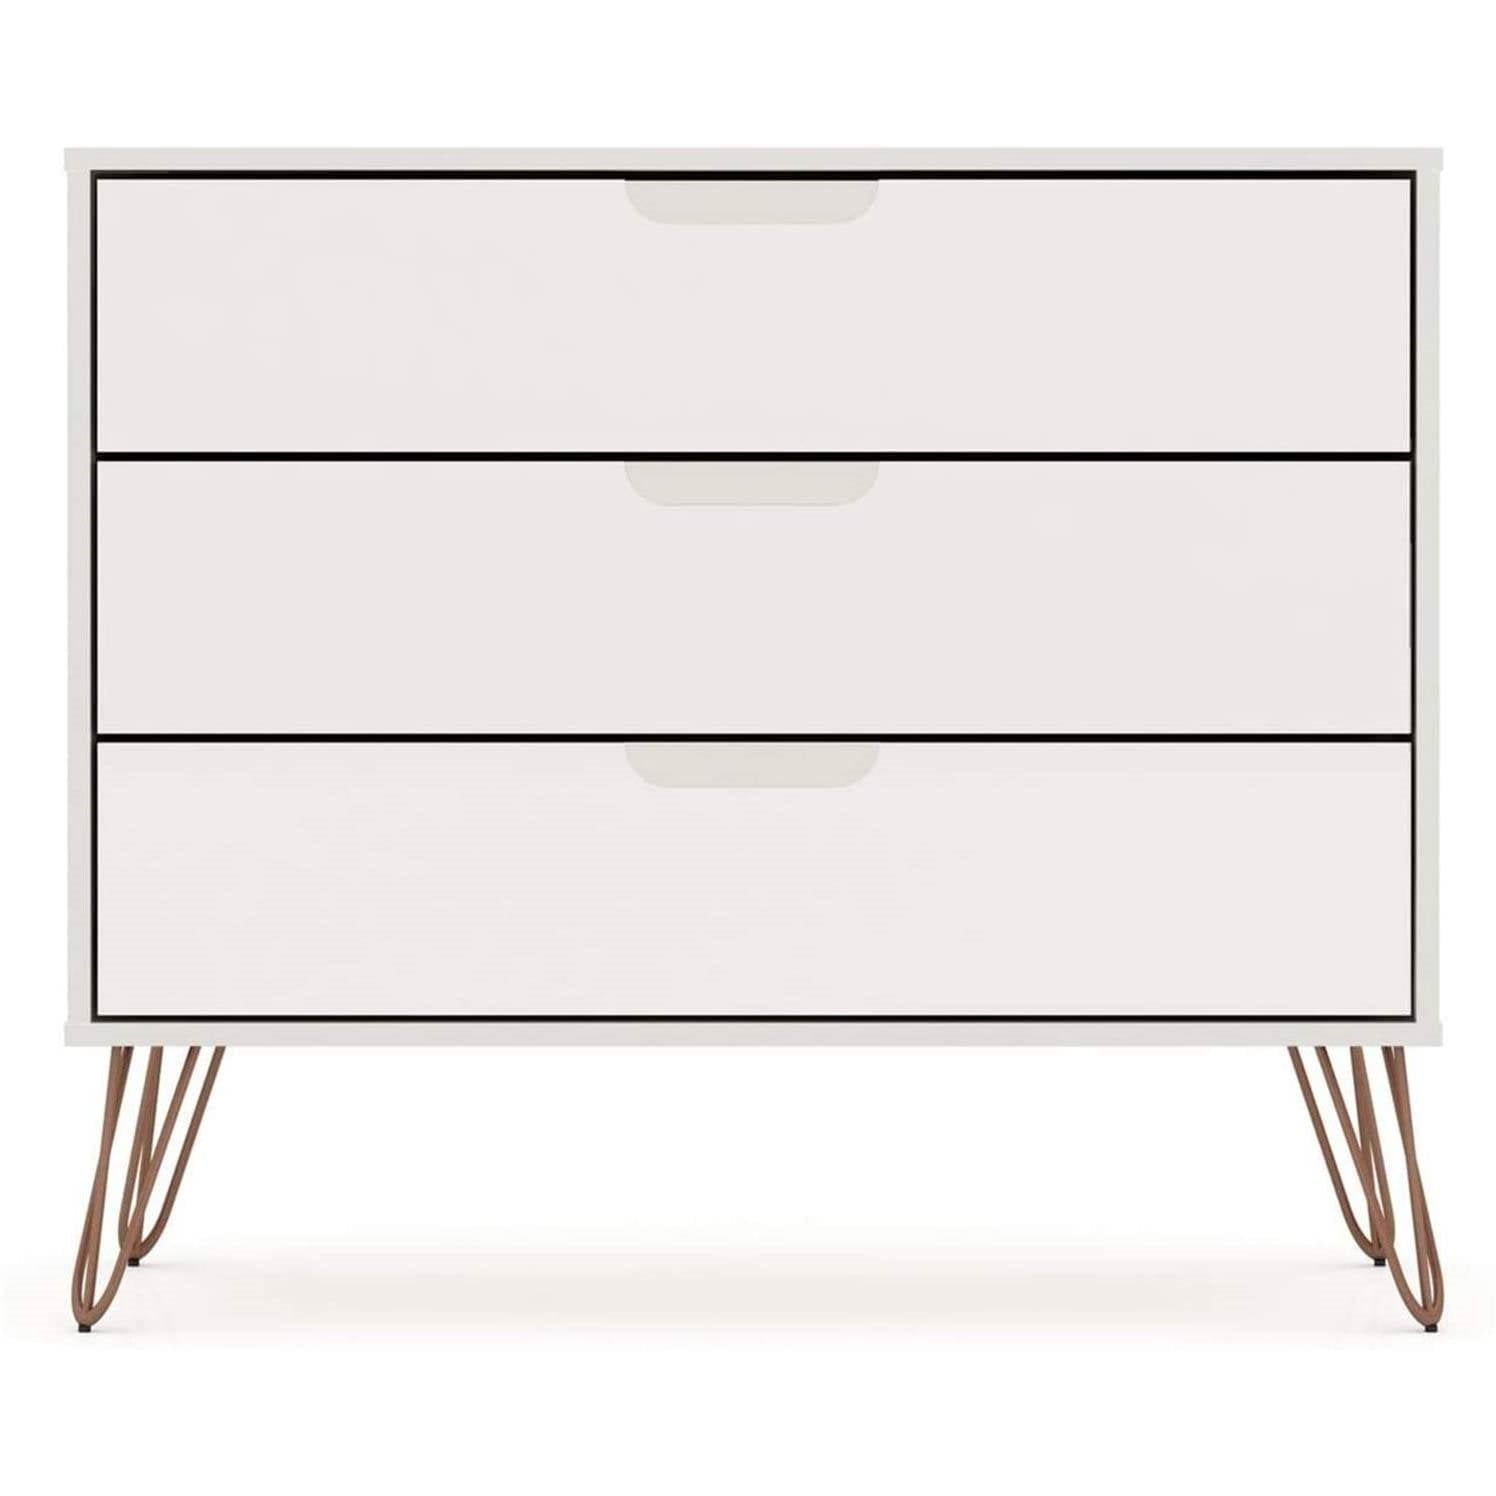 Bedroom > Nightstand And Dressers - Modern Scandinavian Style Bedroom 3-Drawer Dresser In Off-White Finish